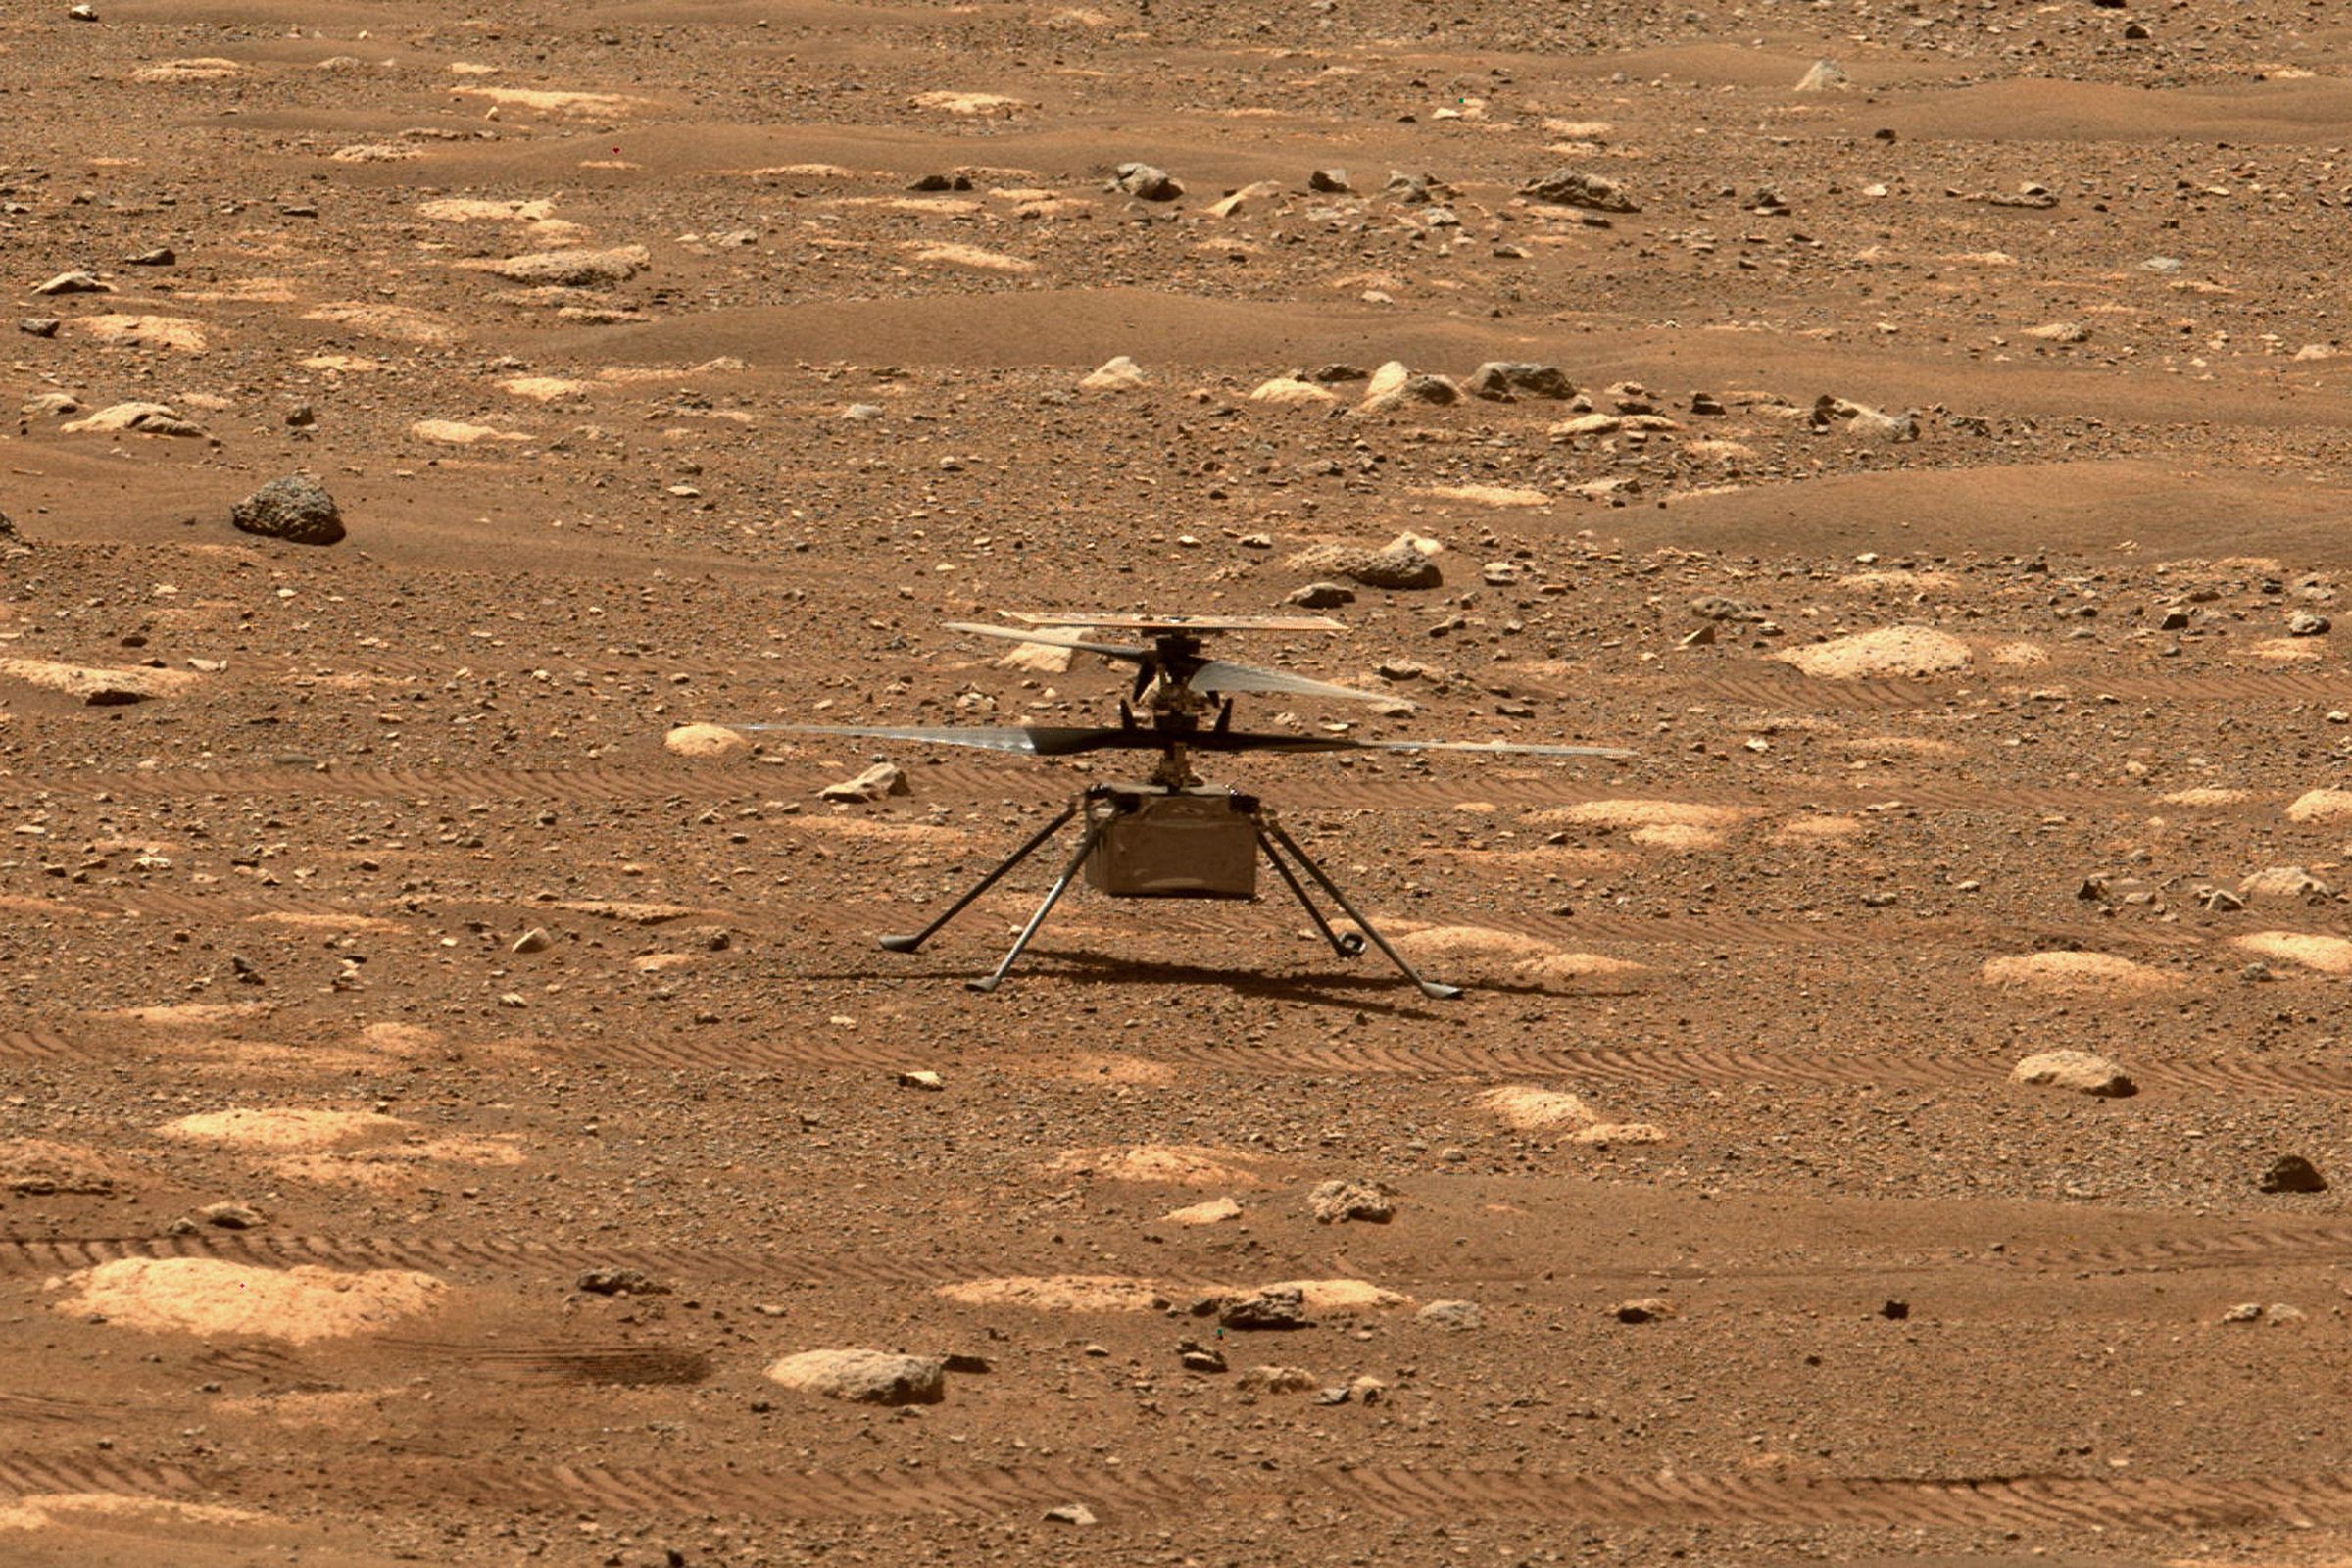 A tiny helicopter standing on four skinny legs on the dusty red Martian surface. 